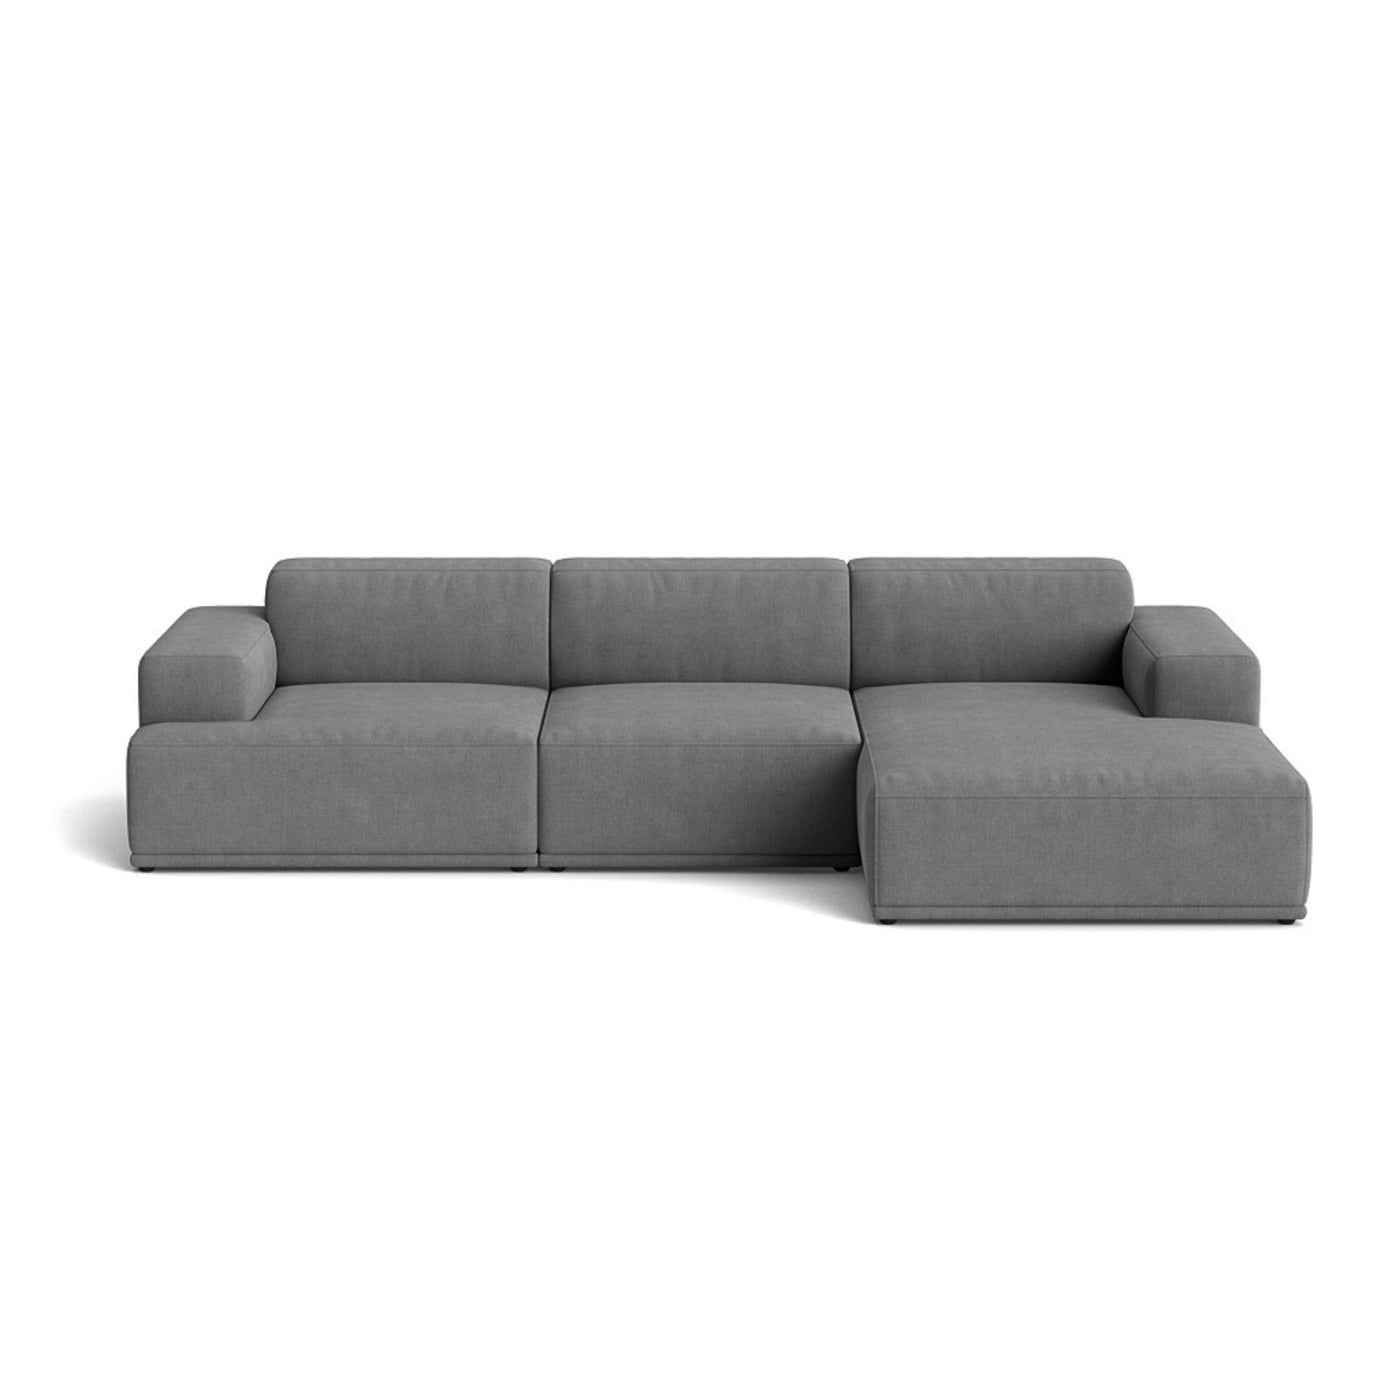 Muuto Connect Soft Modular 3 Seater Sofa, configuration 3. Made-to-order from someday designs. #colour_fiord-171